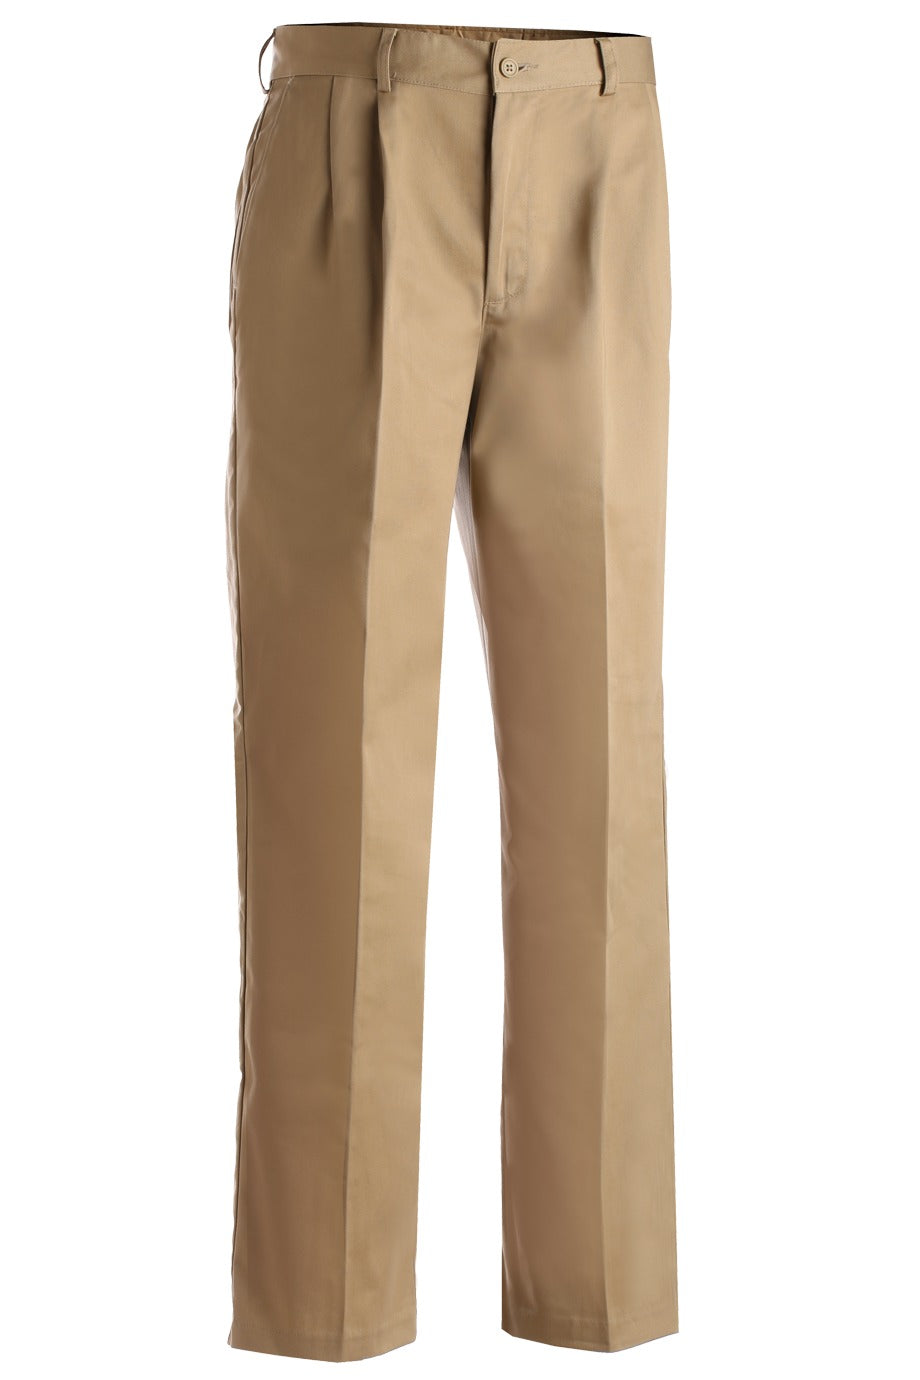 Men's Tan All-Cotton Pleated Pant